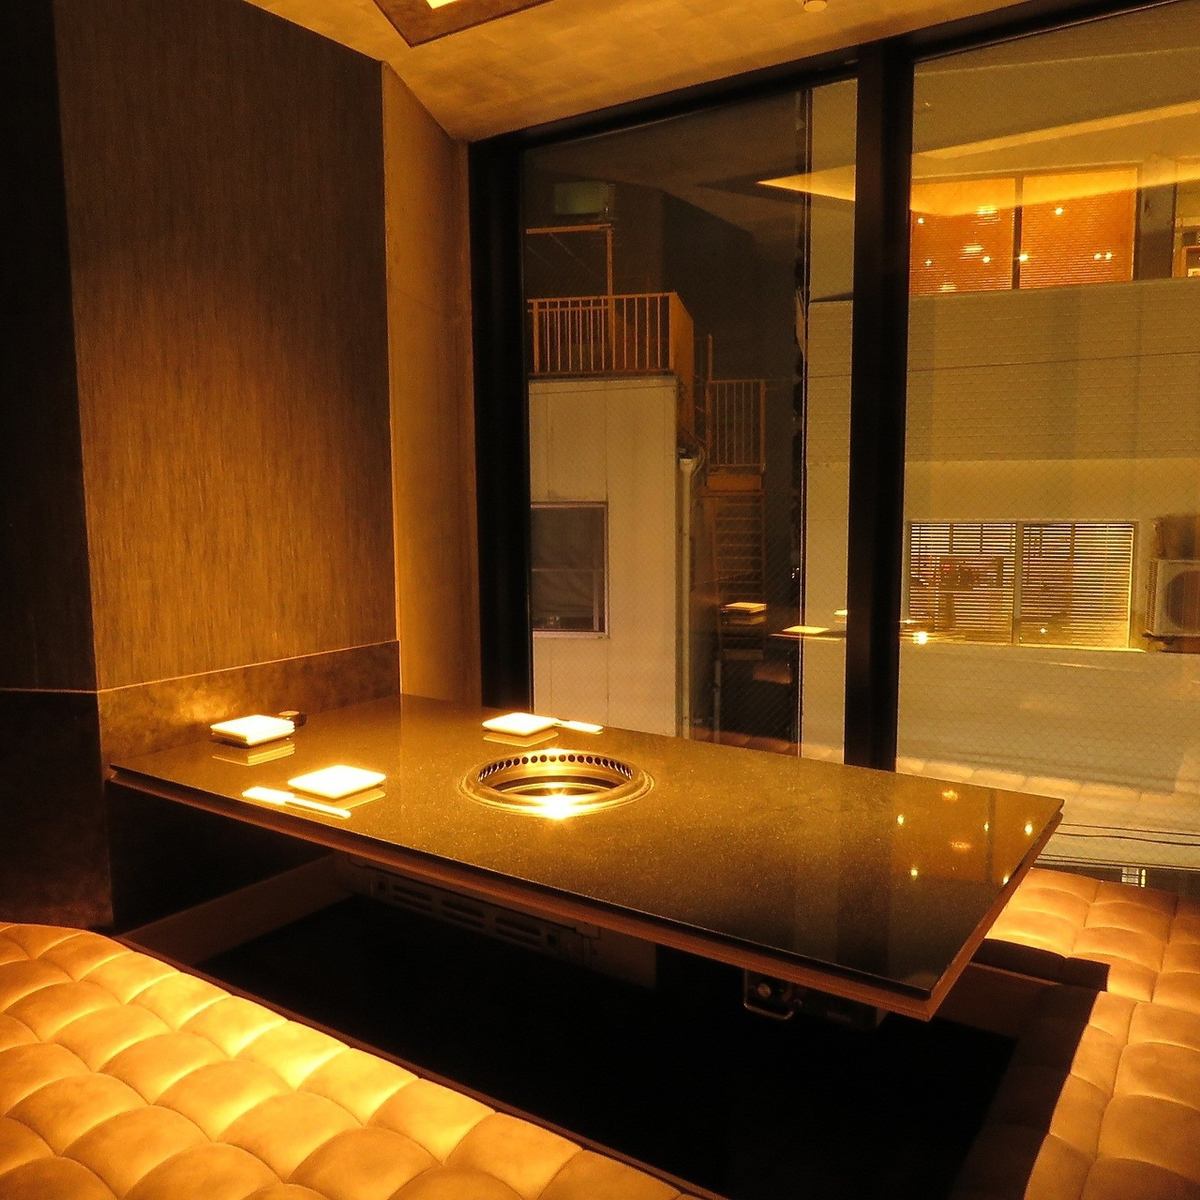 We have private rooms with sunken kotatsu tables, perfect for parties and girls' parties.